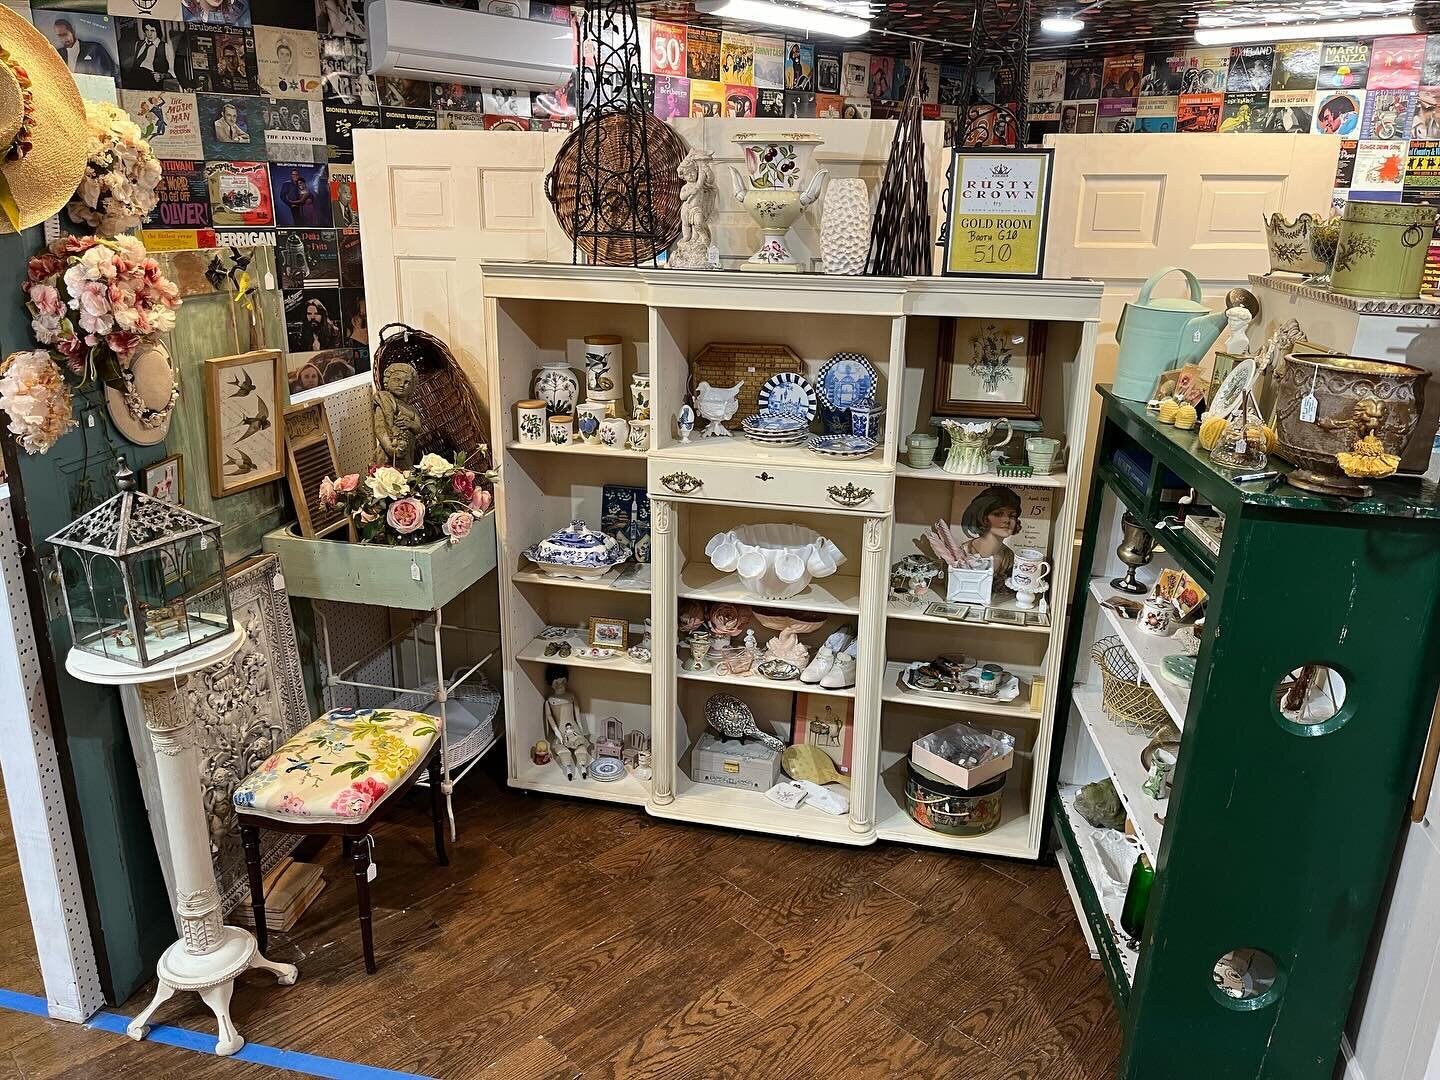 🚨 NEW VENDOR ALERT 🚨 

It&rsquo;s a beautiful day to welcome Cathy (Vendor 510) to The Rusty Crown! Cathy&rsquo;s booth is evocative of stepping into a lovely English garden, and her showcase features gorgeous jewelry and trinkets from Victorian to